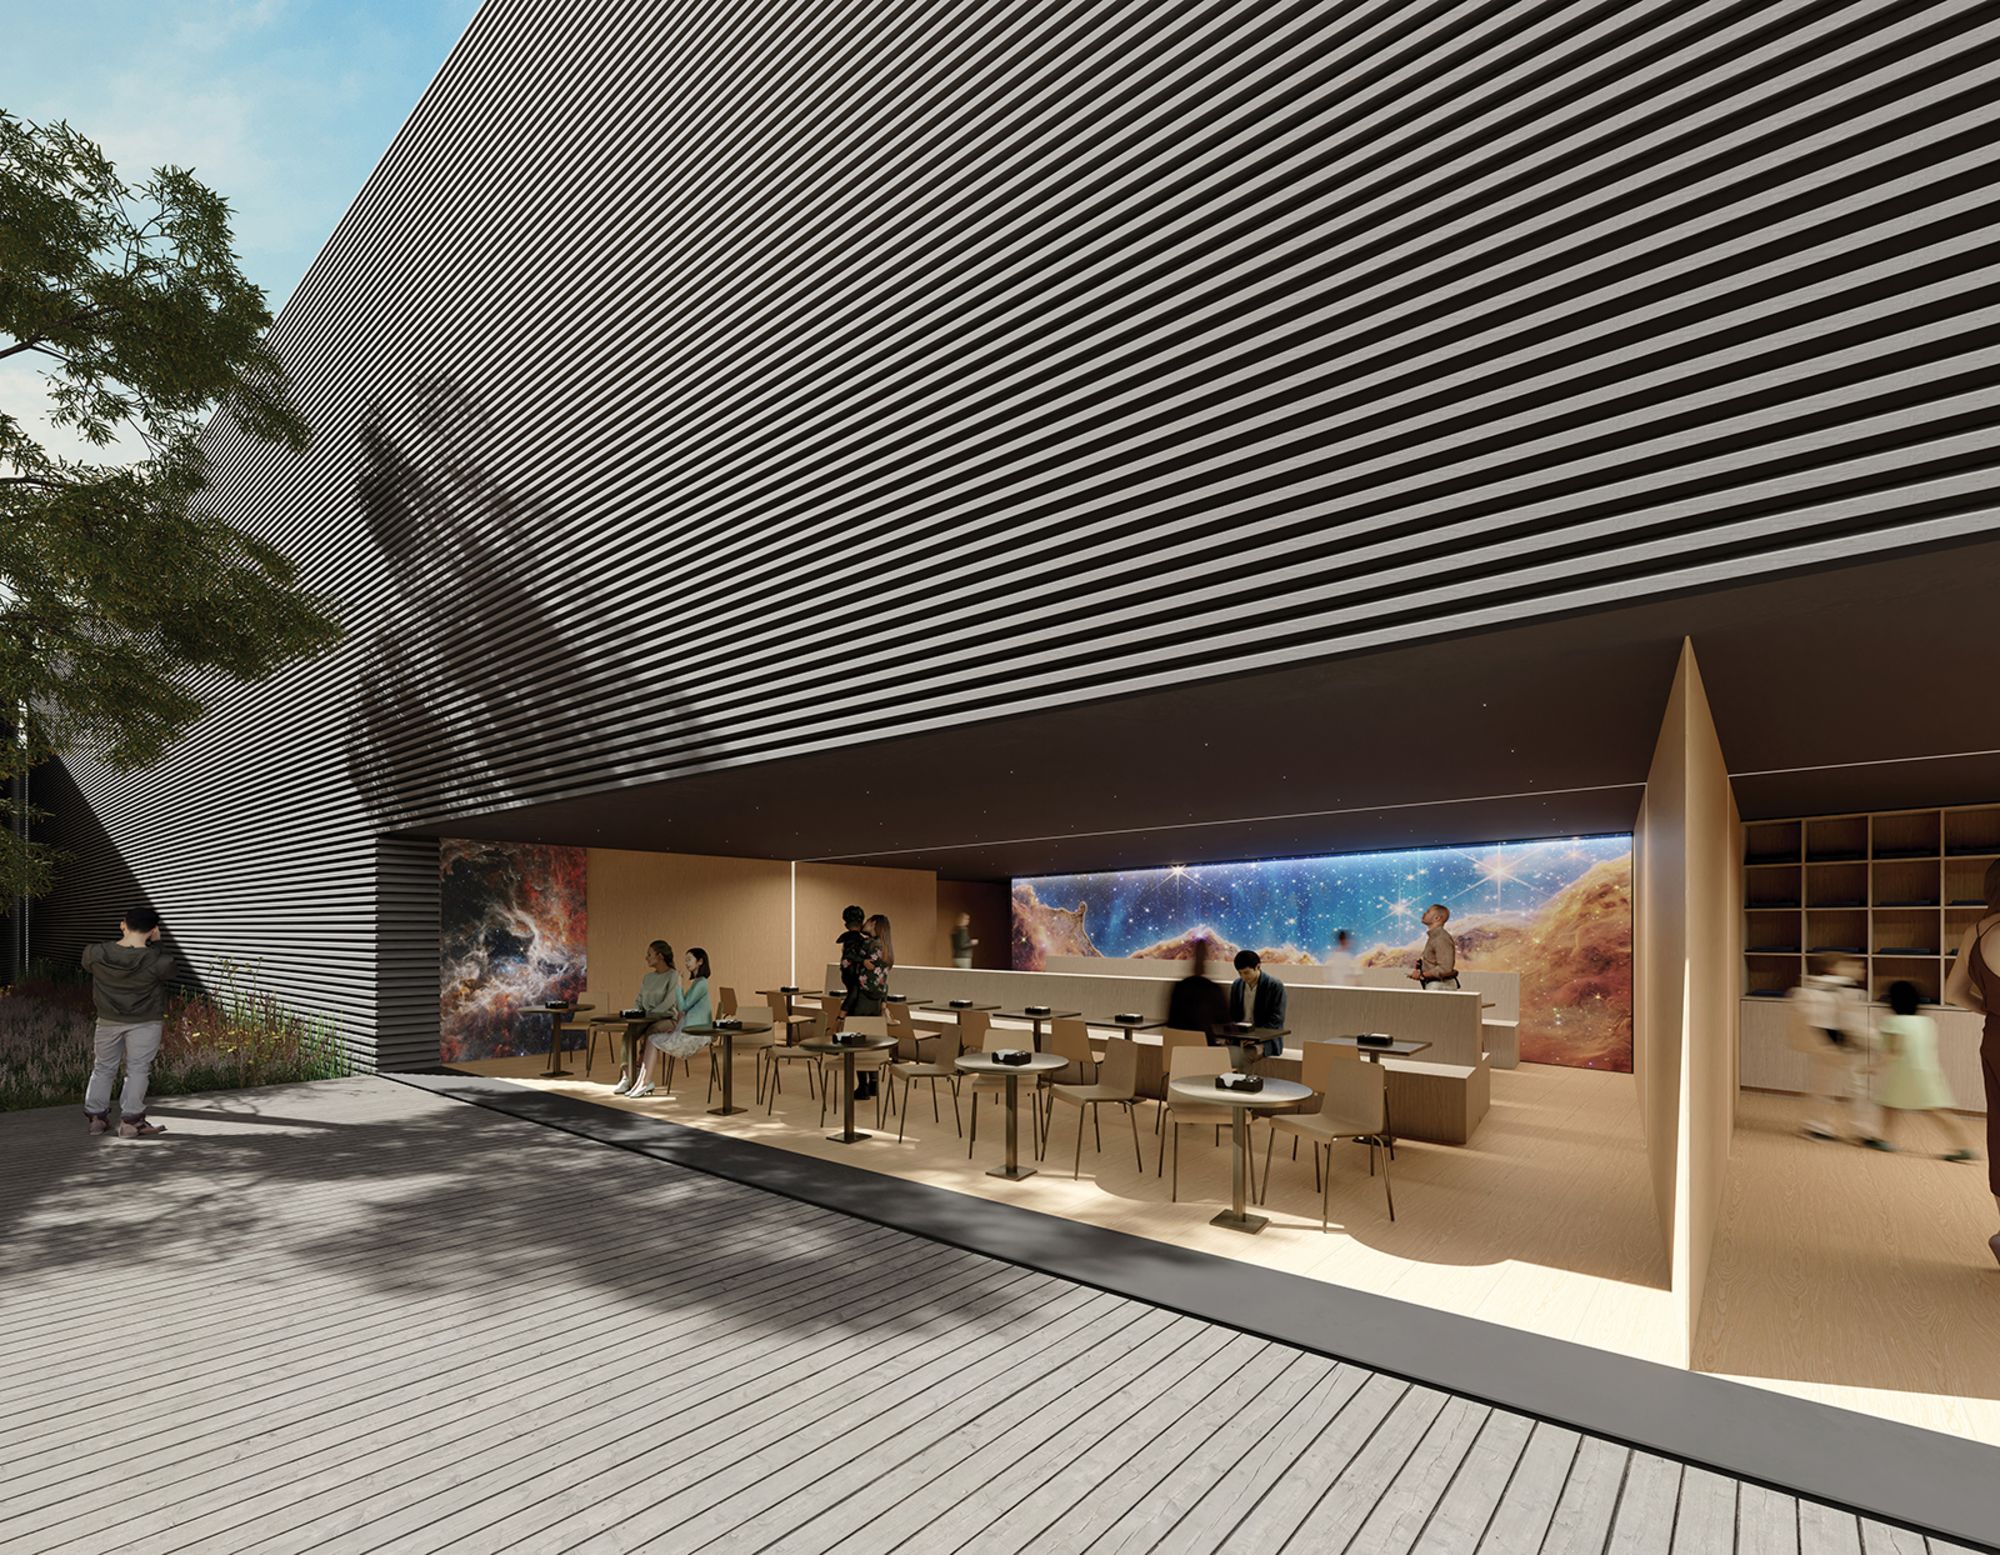 The US pavilion at Expo 2025 Osaka will be the “embodiment of American spirit, celebrating innovation, openness, and global cultural exchange,” said Rahm Emanuel, the US Ambassador to Japan.